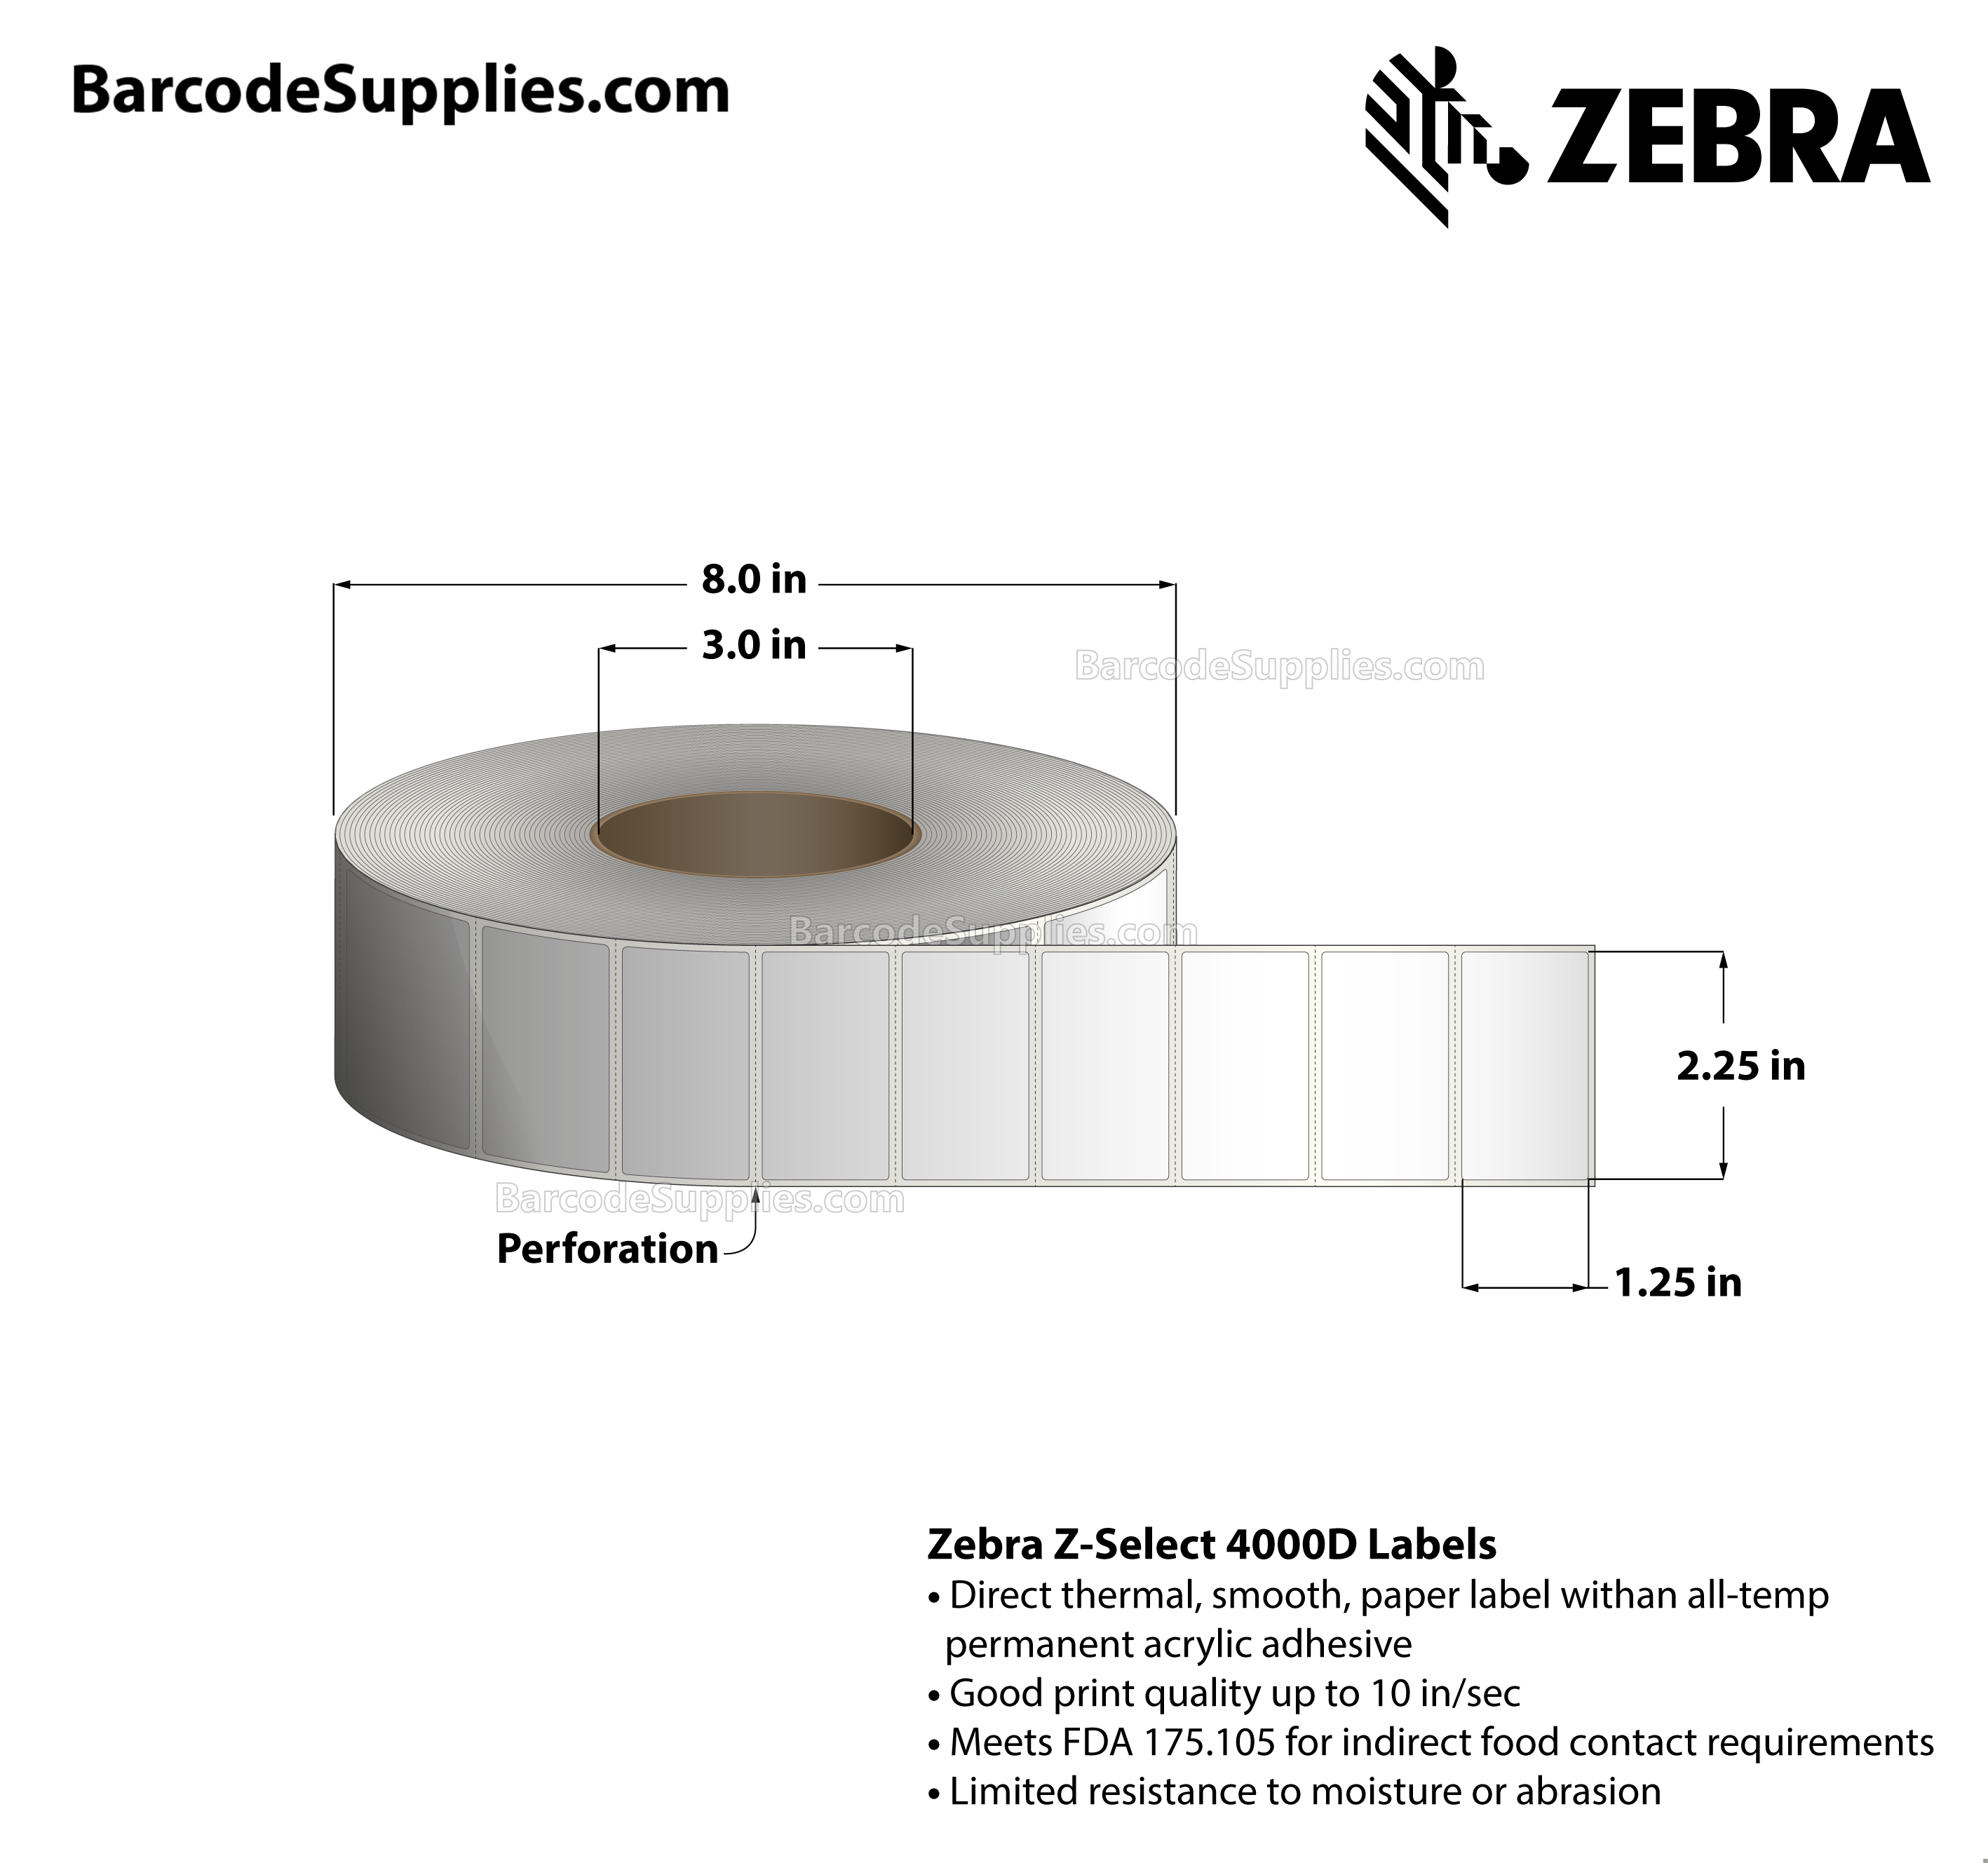 2.25 x 1.25 Direct Thermal White Z-Select 4000D Labels With All-Temp Adhesive - Perforated - 3770 Labels Per Roll - Carton Of 8 Rolls - 30160 Labels Total - MPN: 10002635